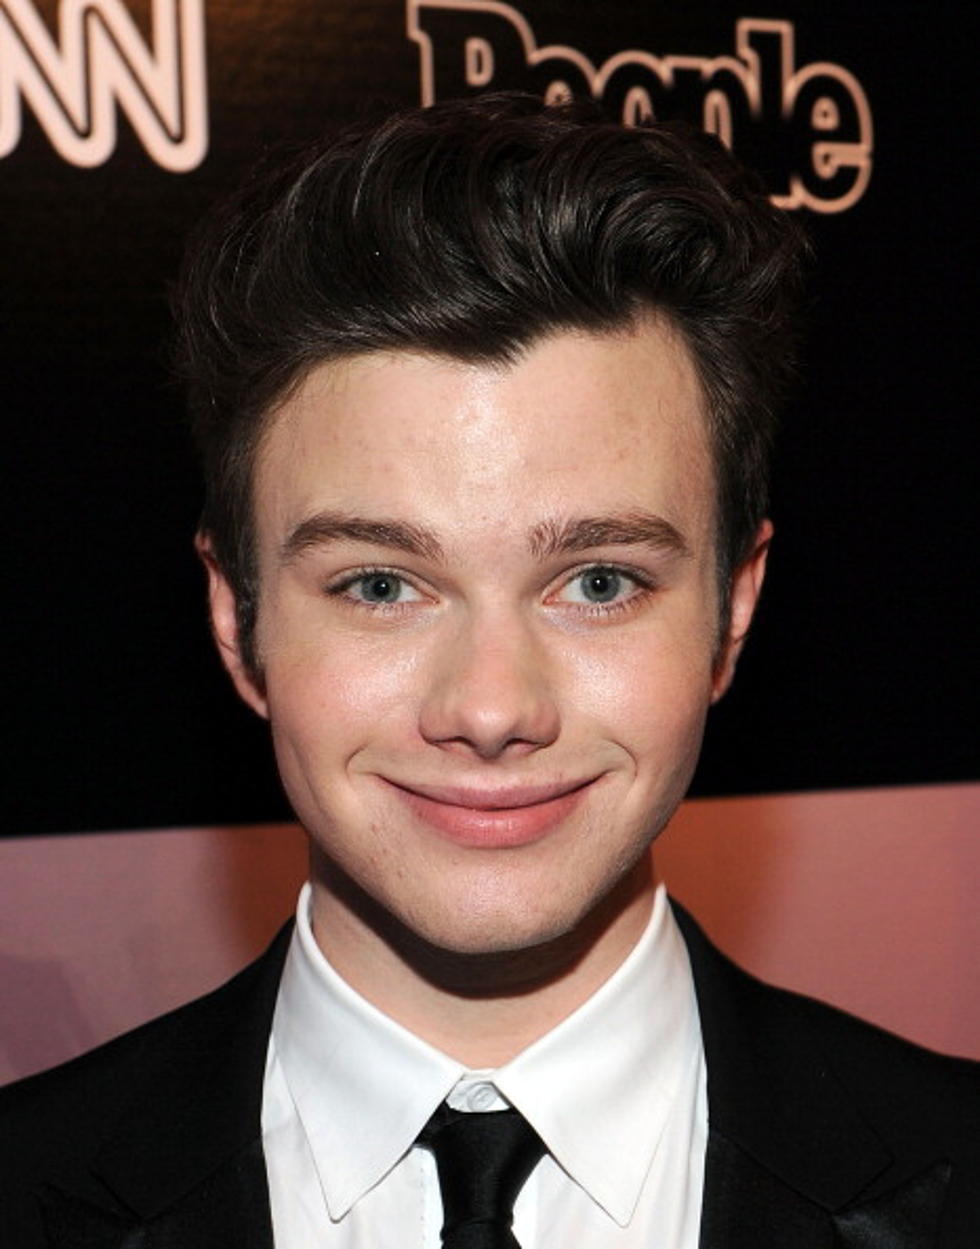 &#8216;Glee&#8217;s&#8217; Kurt, Chris Colfer, Is One of the Celebrities Celebrating a Birthday Today